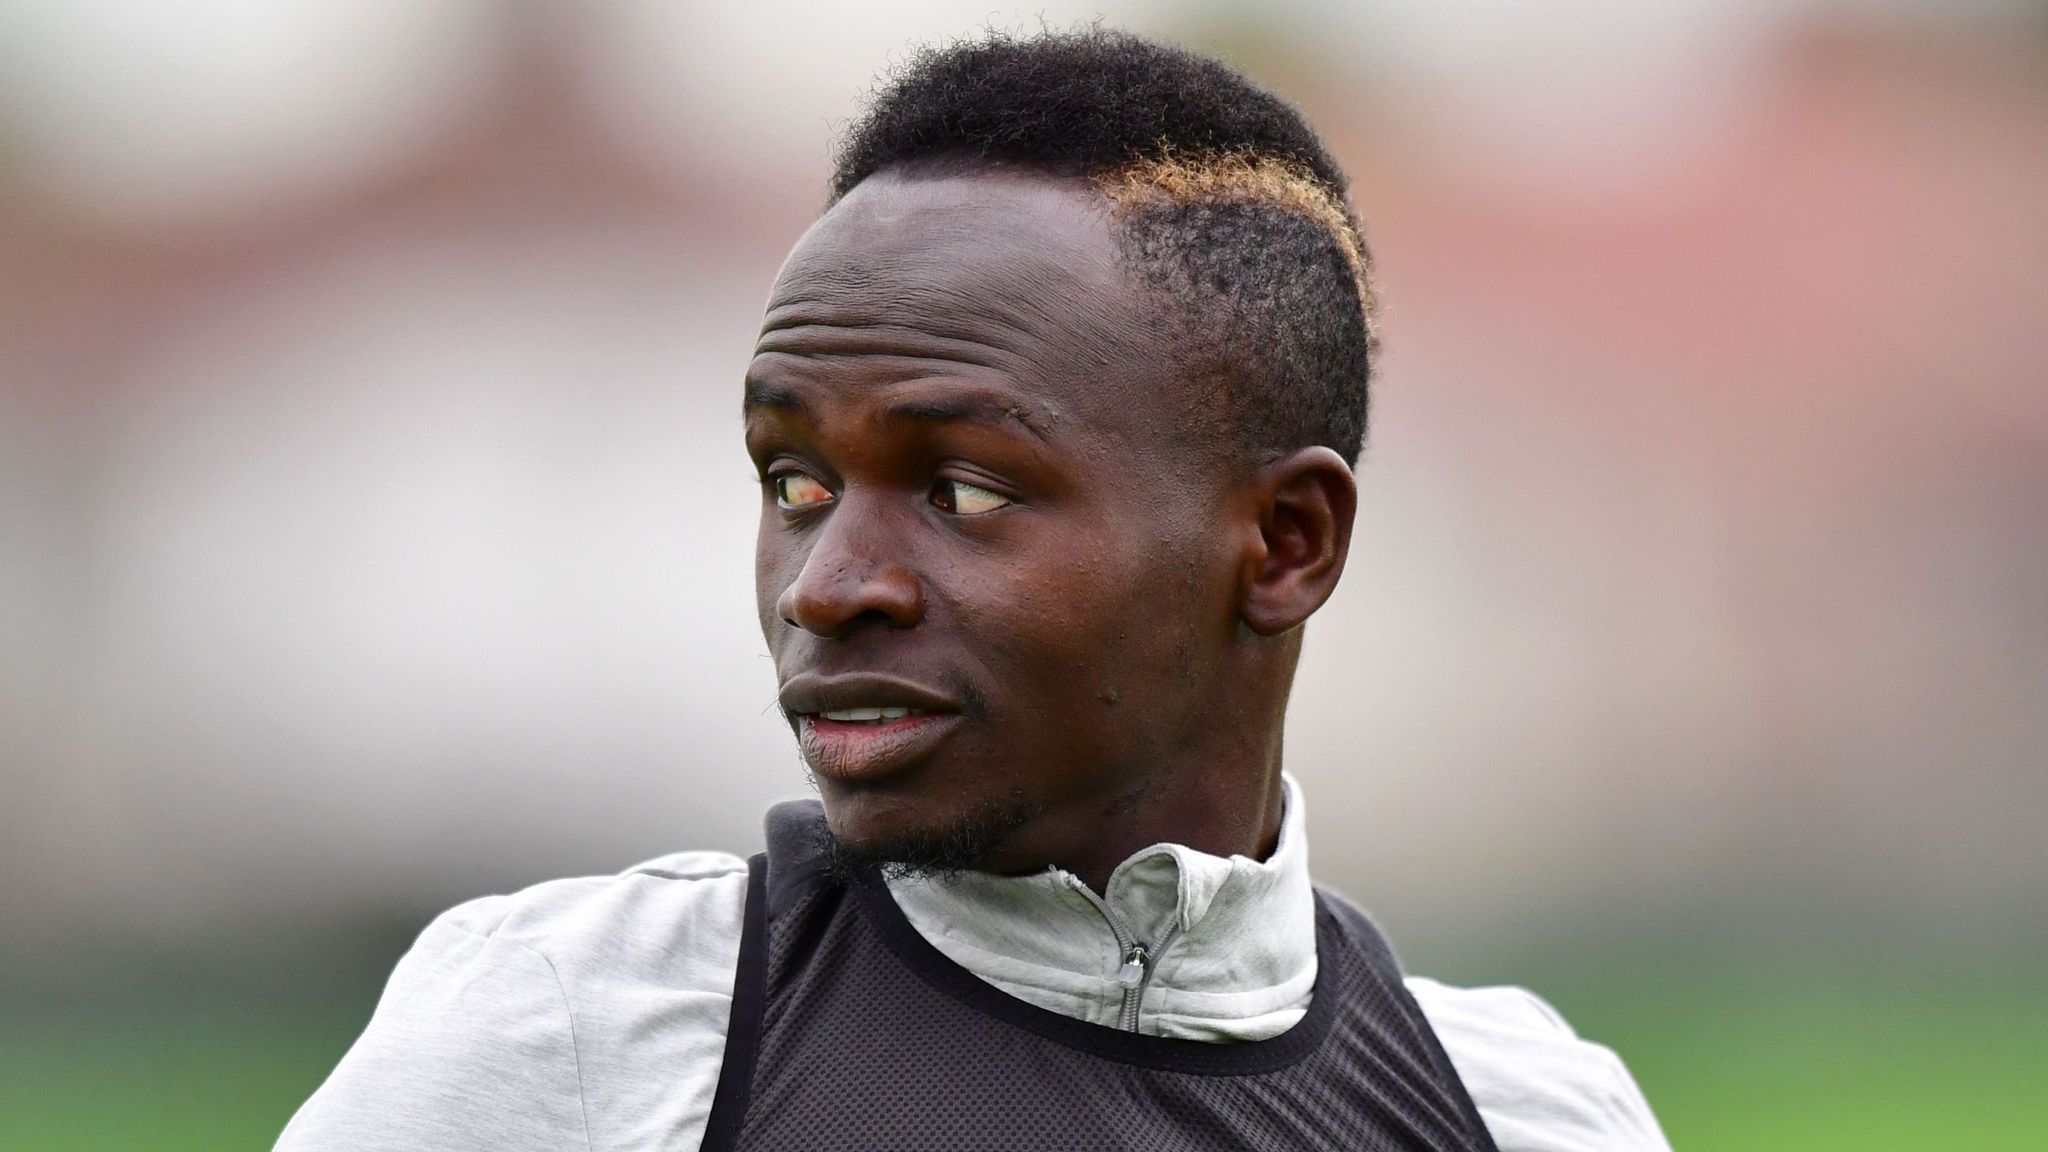 Mohammed Salah offers support to Sadio Mane after Liverpool forward's  injury | Football News | Sky Sports